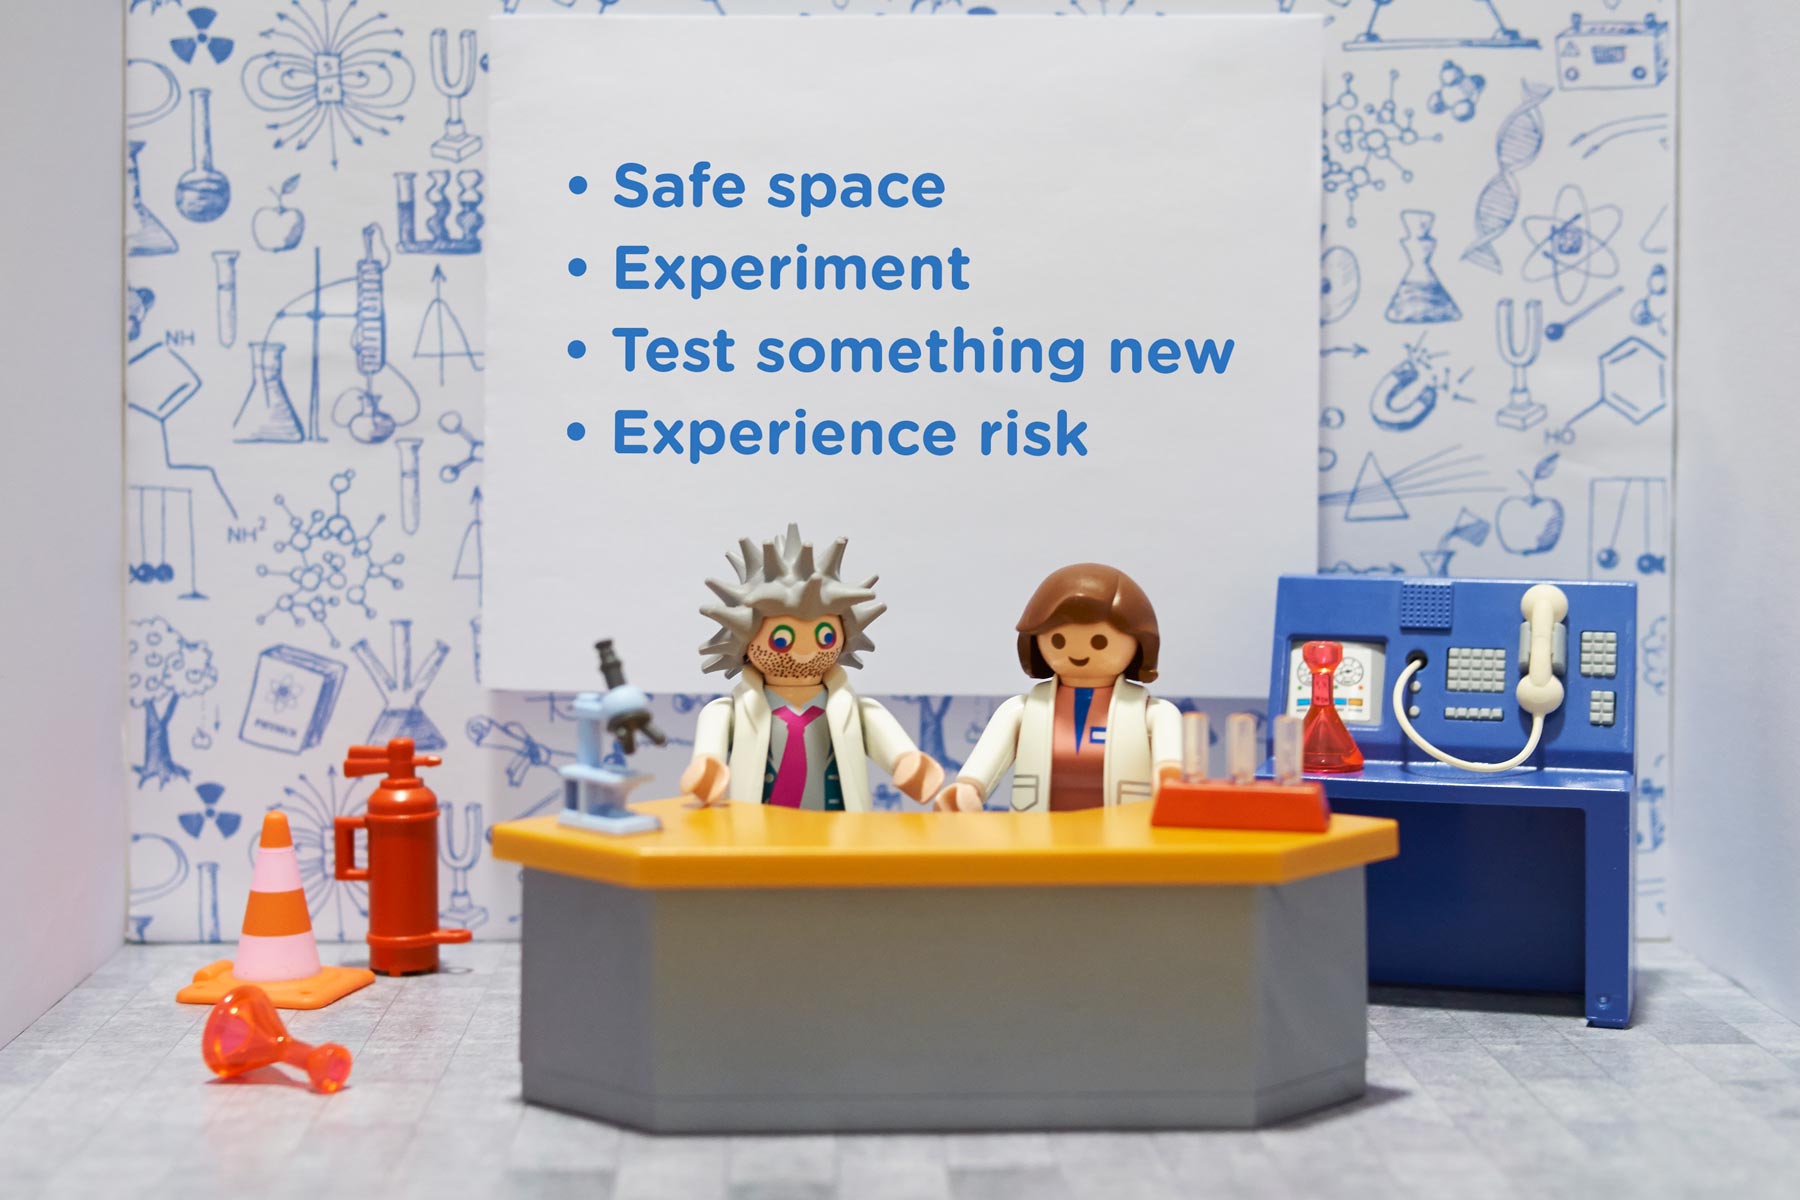 Safe space, Experiment, Test something new, Experience risk